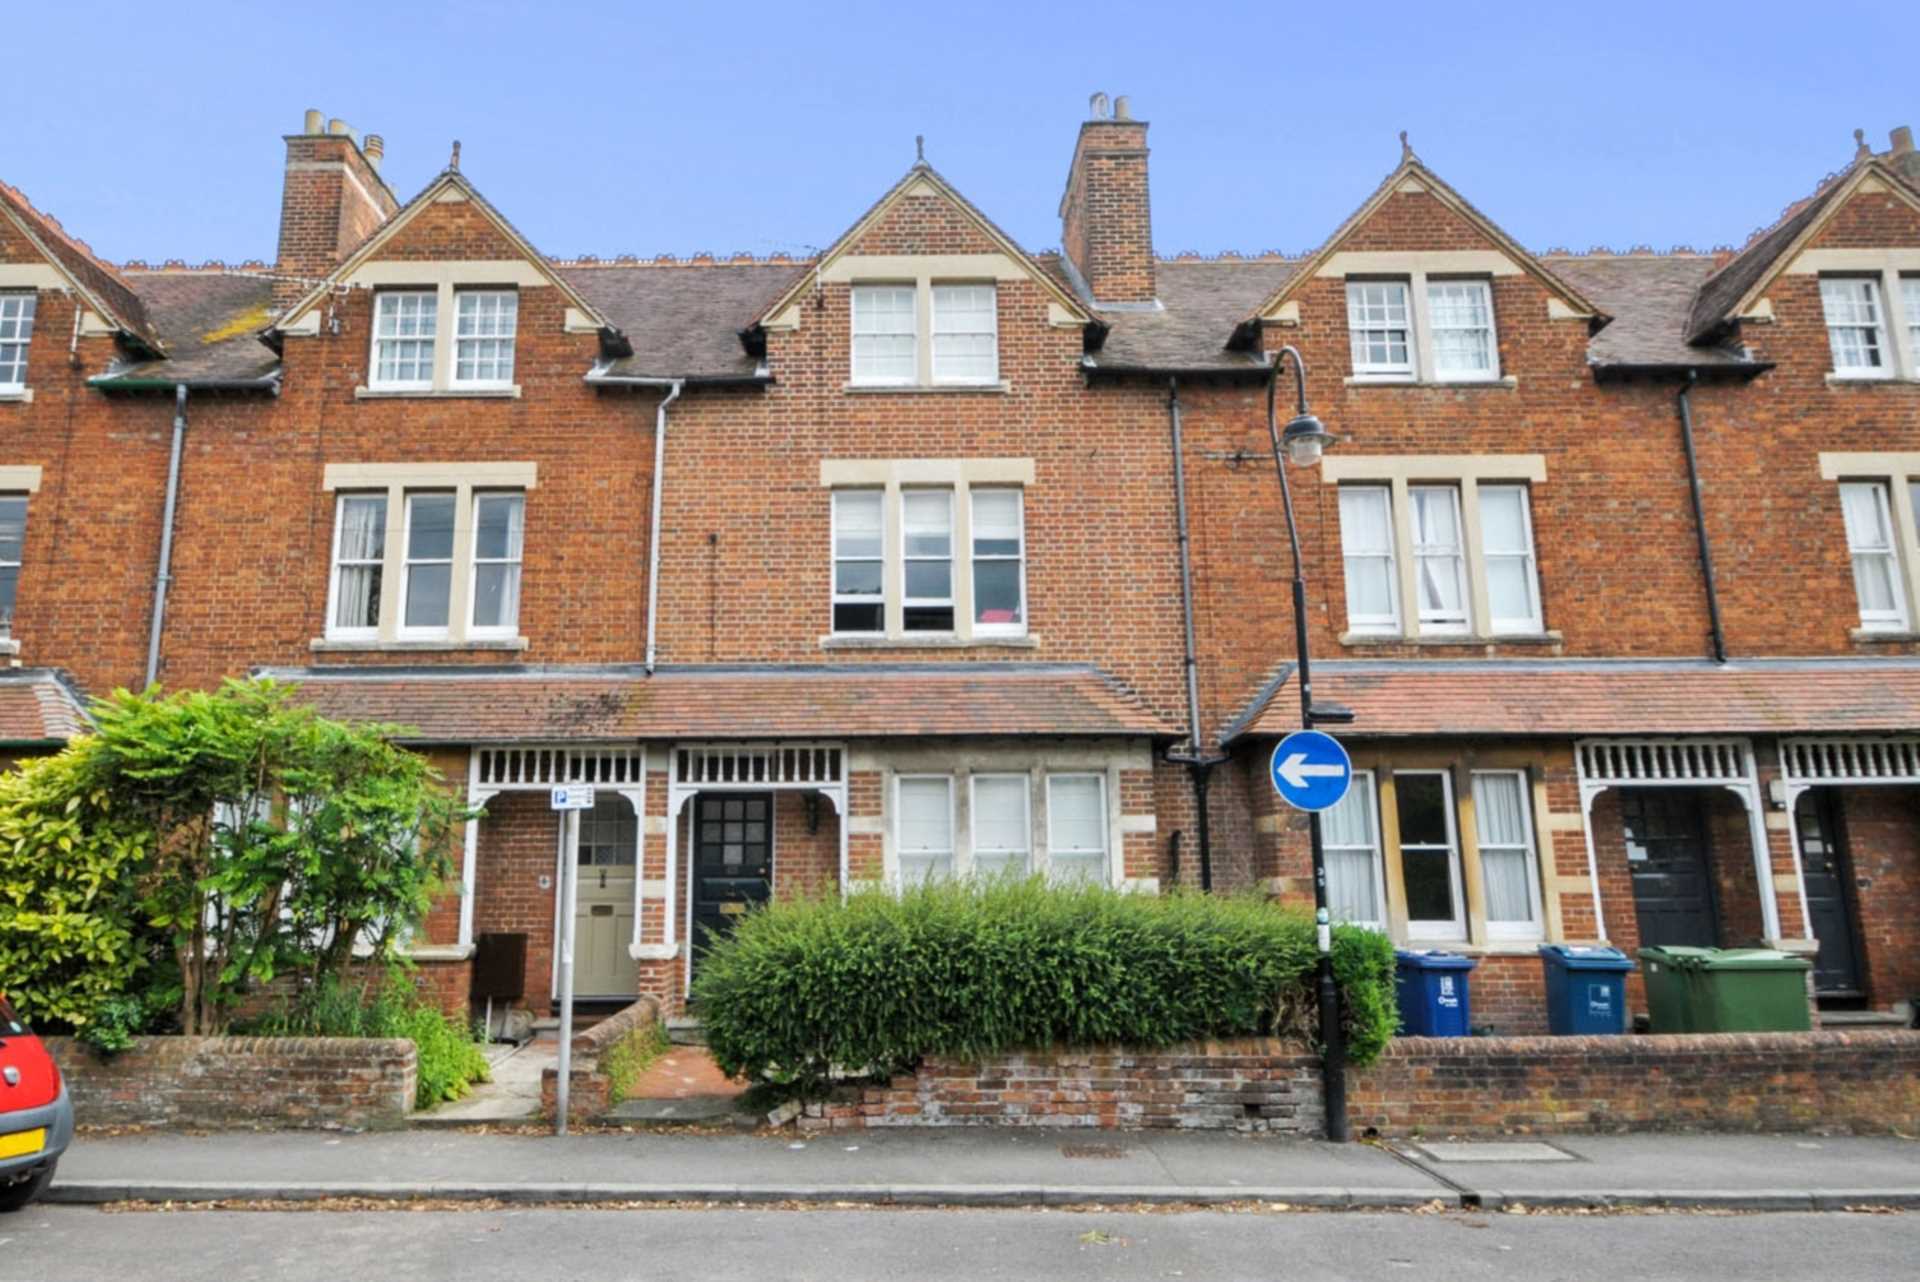 5 bed Mid Terraced House for rent in Oxford. From James C Penny Estate Agents - Central North Oxford